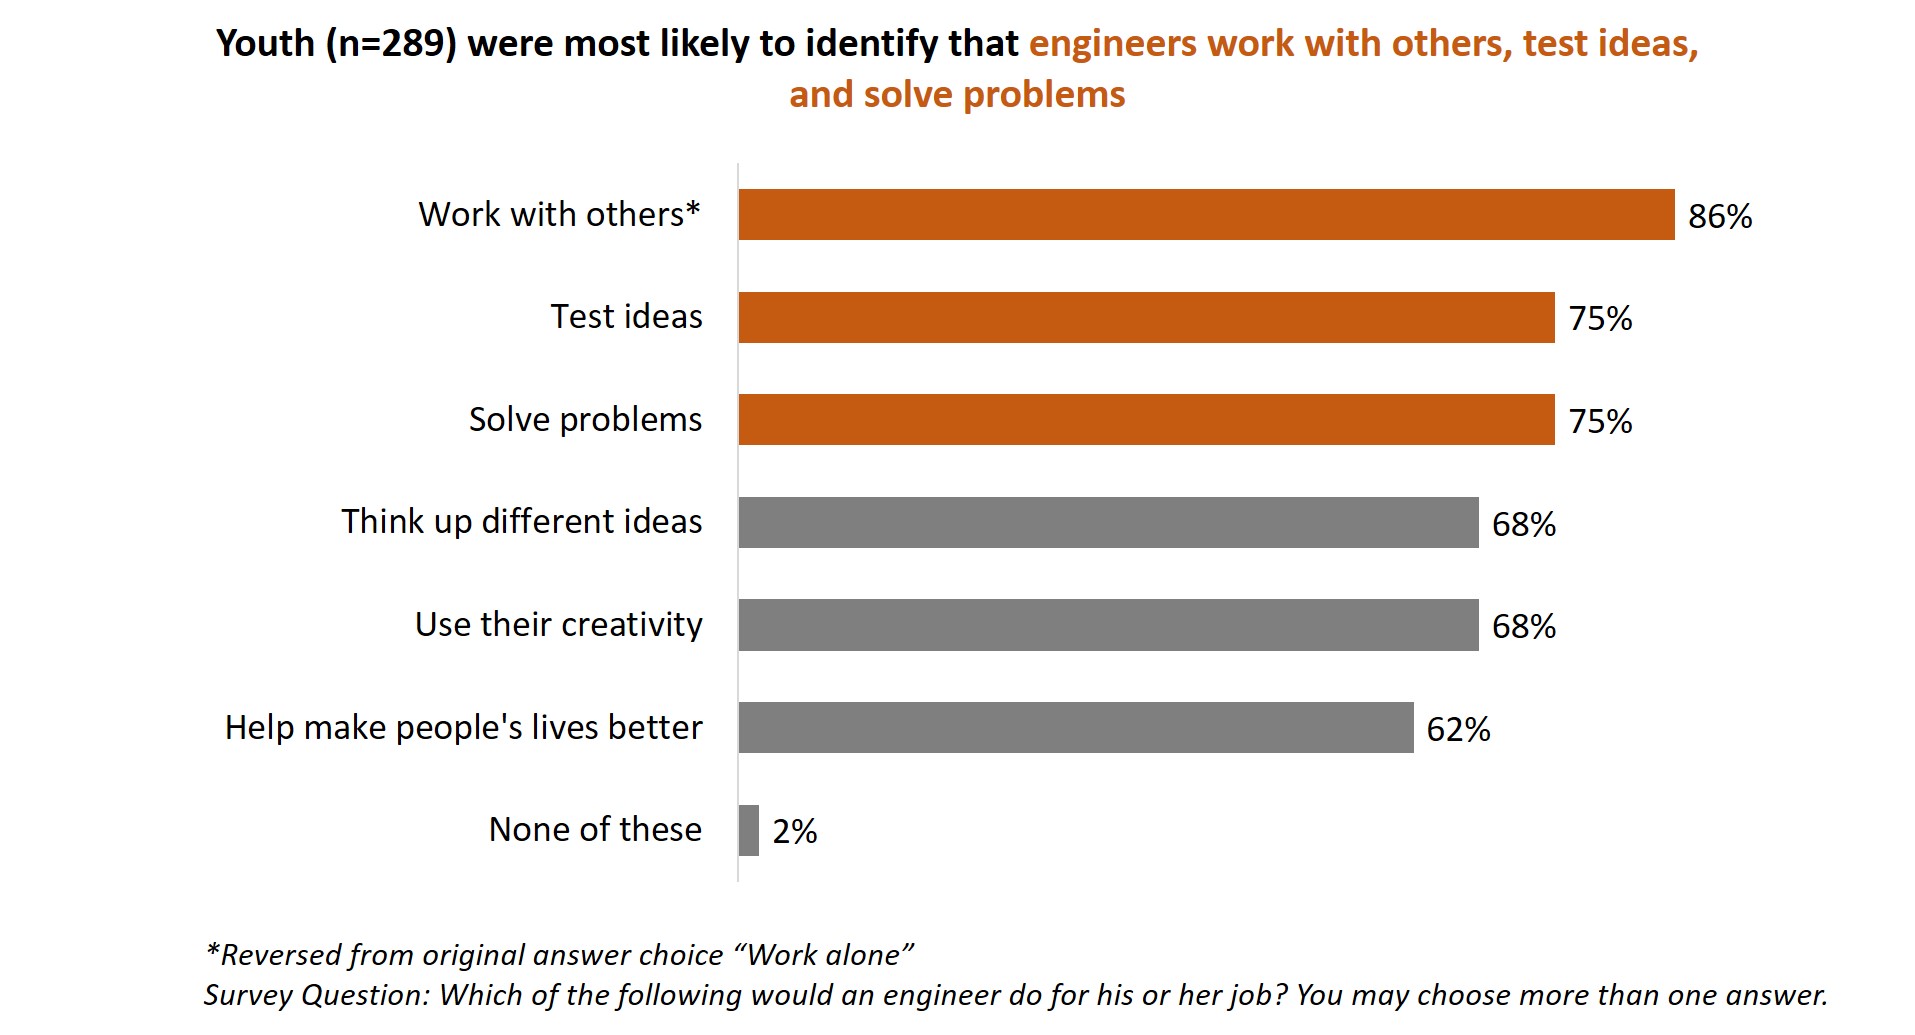 Figure 4: Findings from a survey of youth participants’ showing their thoughts about what engineers do for their jobs